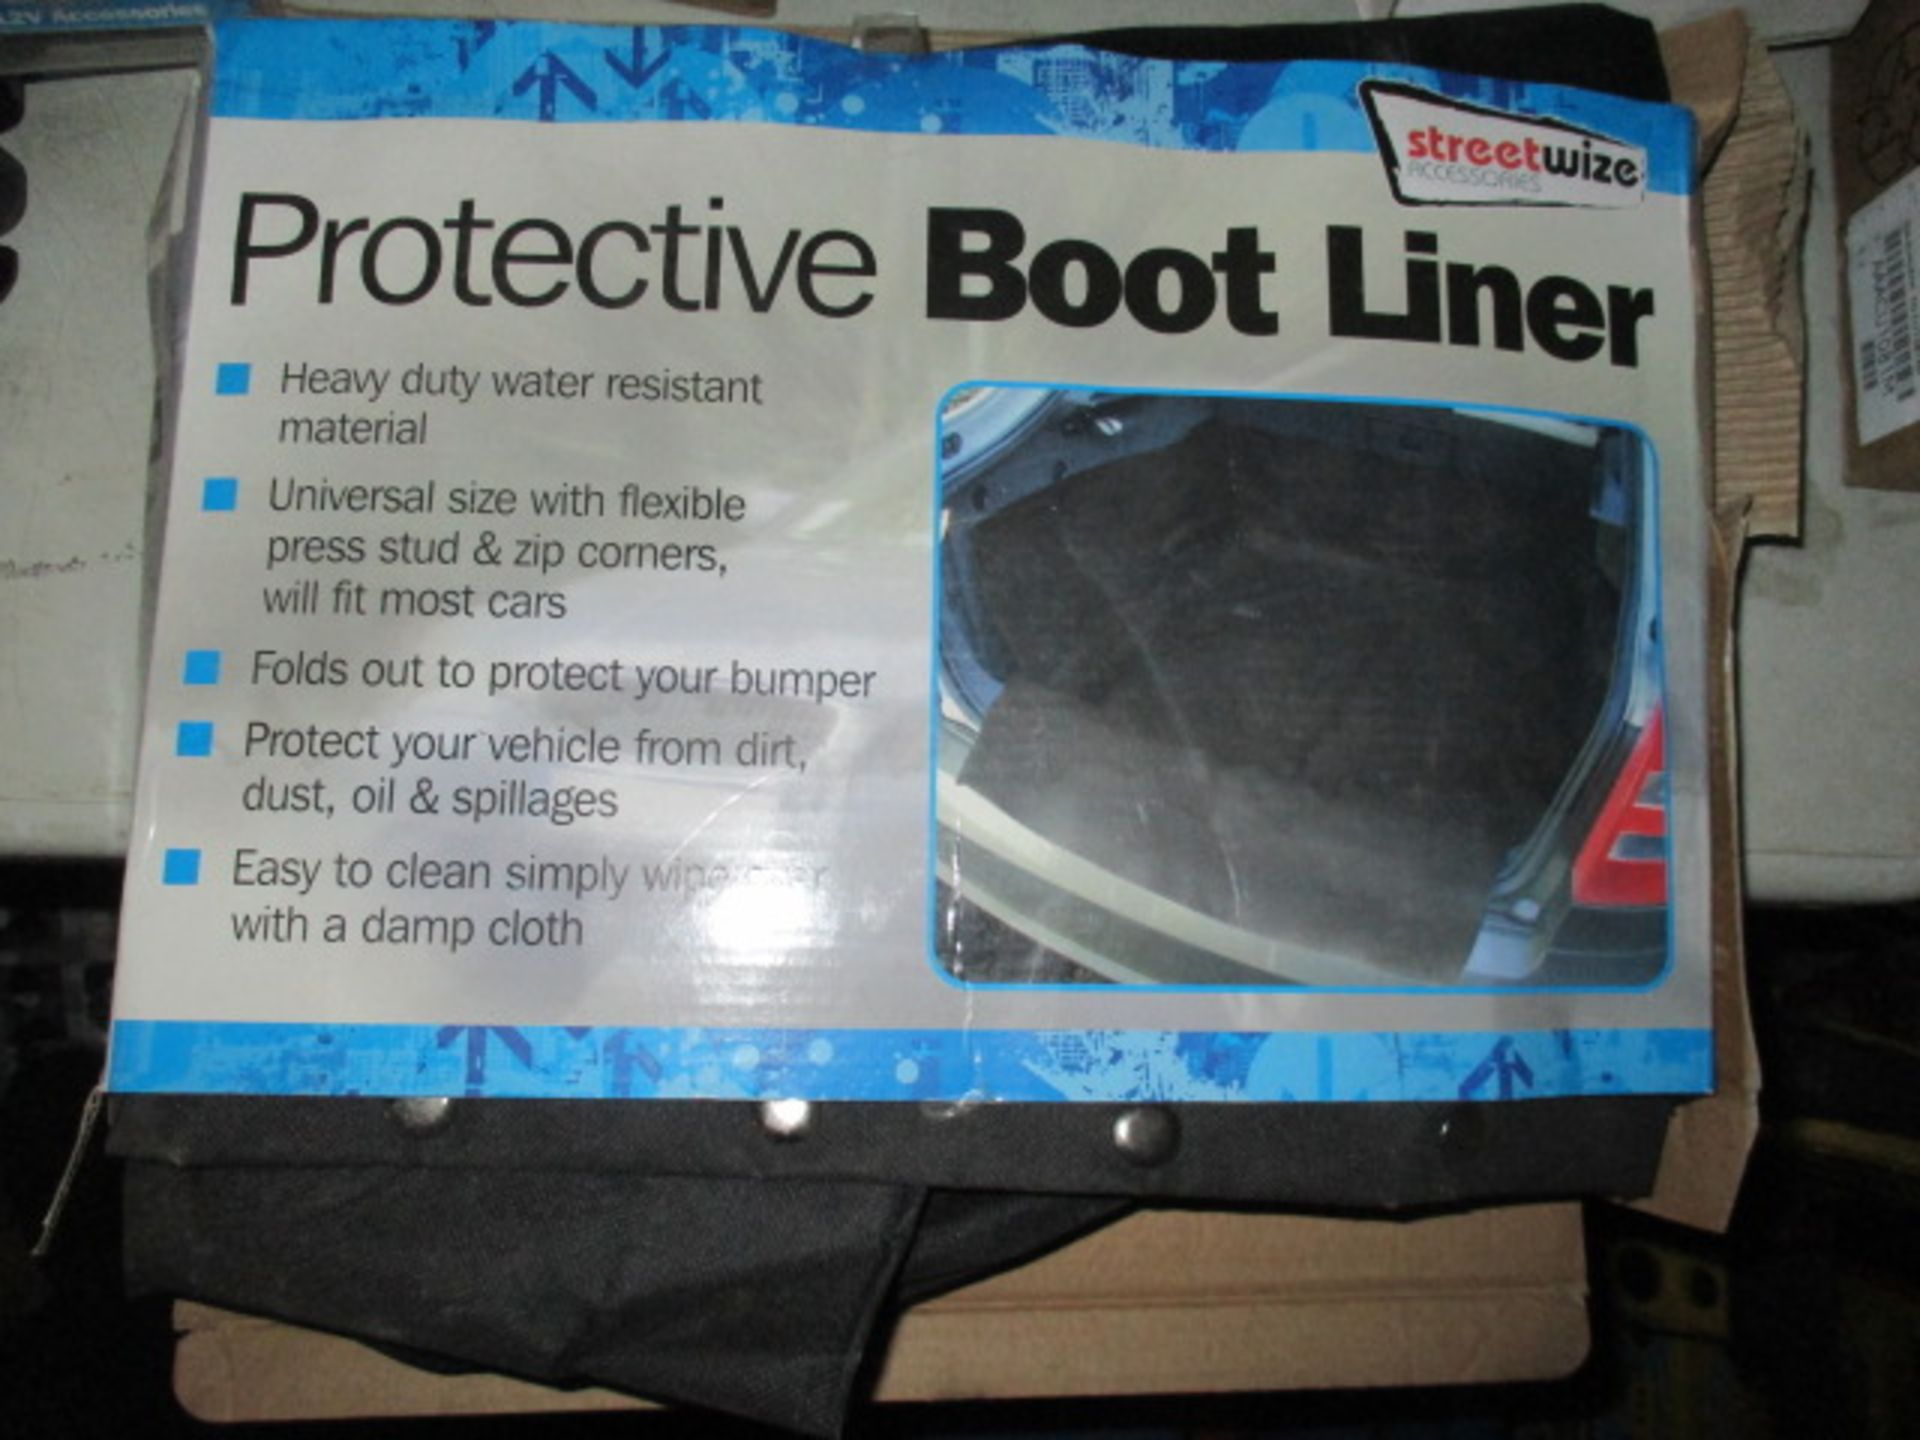 Protective boot liner cover boxed